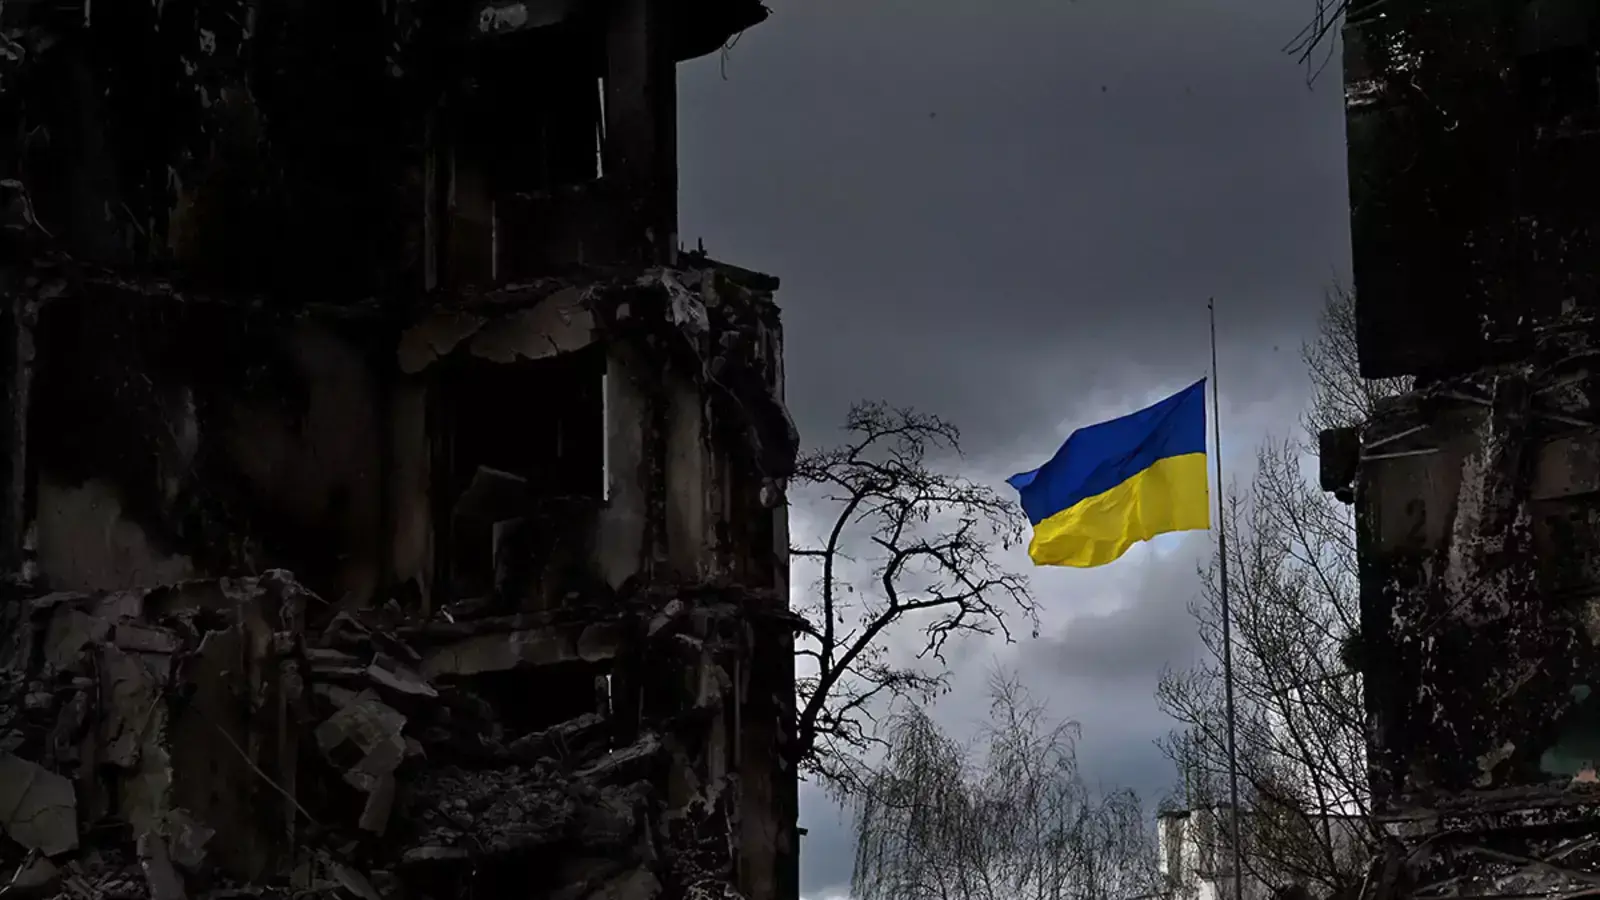 The Ukrainian flag flutters amid buildings destroyed in Russia’s bombardment of the Ukrainian town of Borodianka.